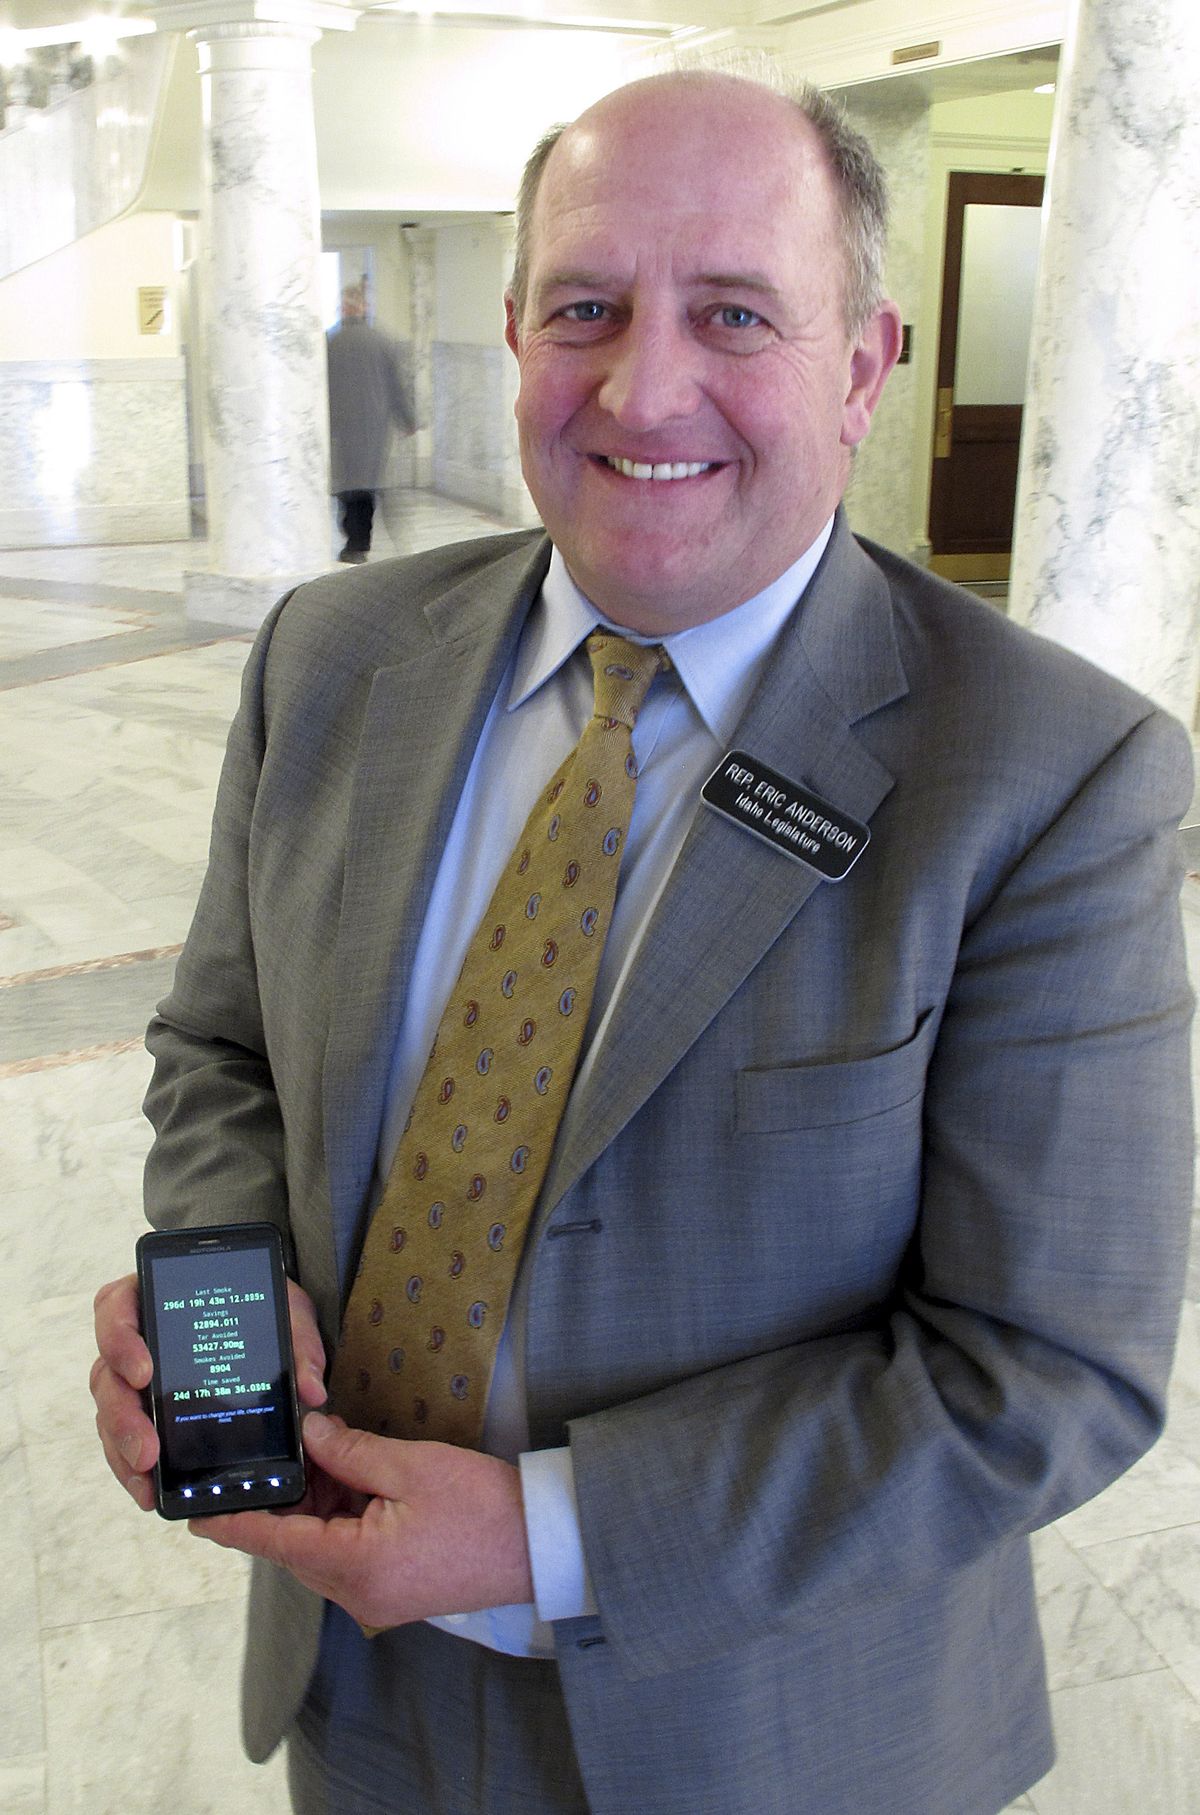 Rep. Eric Anderson poses Monday with a smartphone showing how many days it’s been since he quit smoking last April. Anderson quitting left Rep. Bob Nonini as the lone Statehouse smoker. (Associated Press)